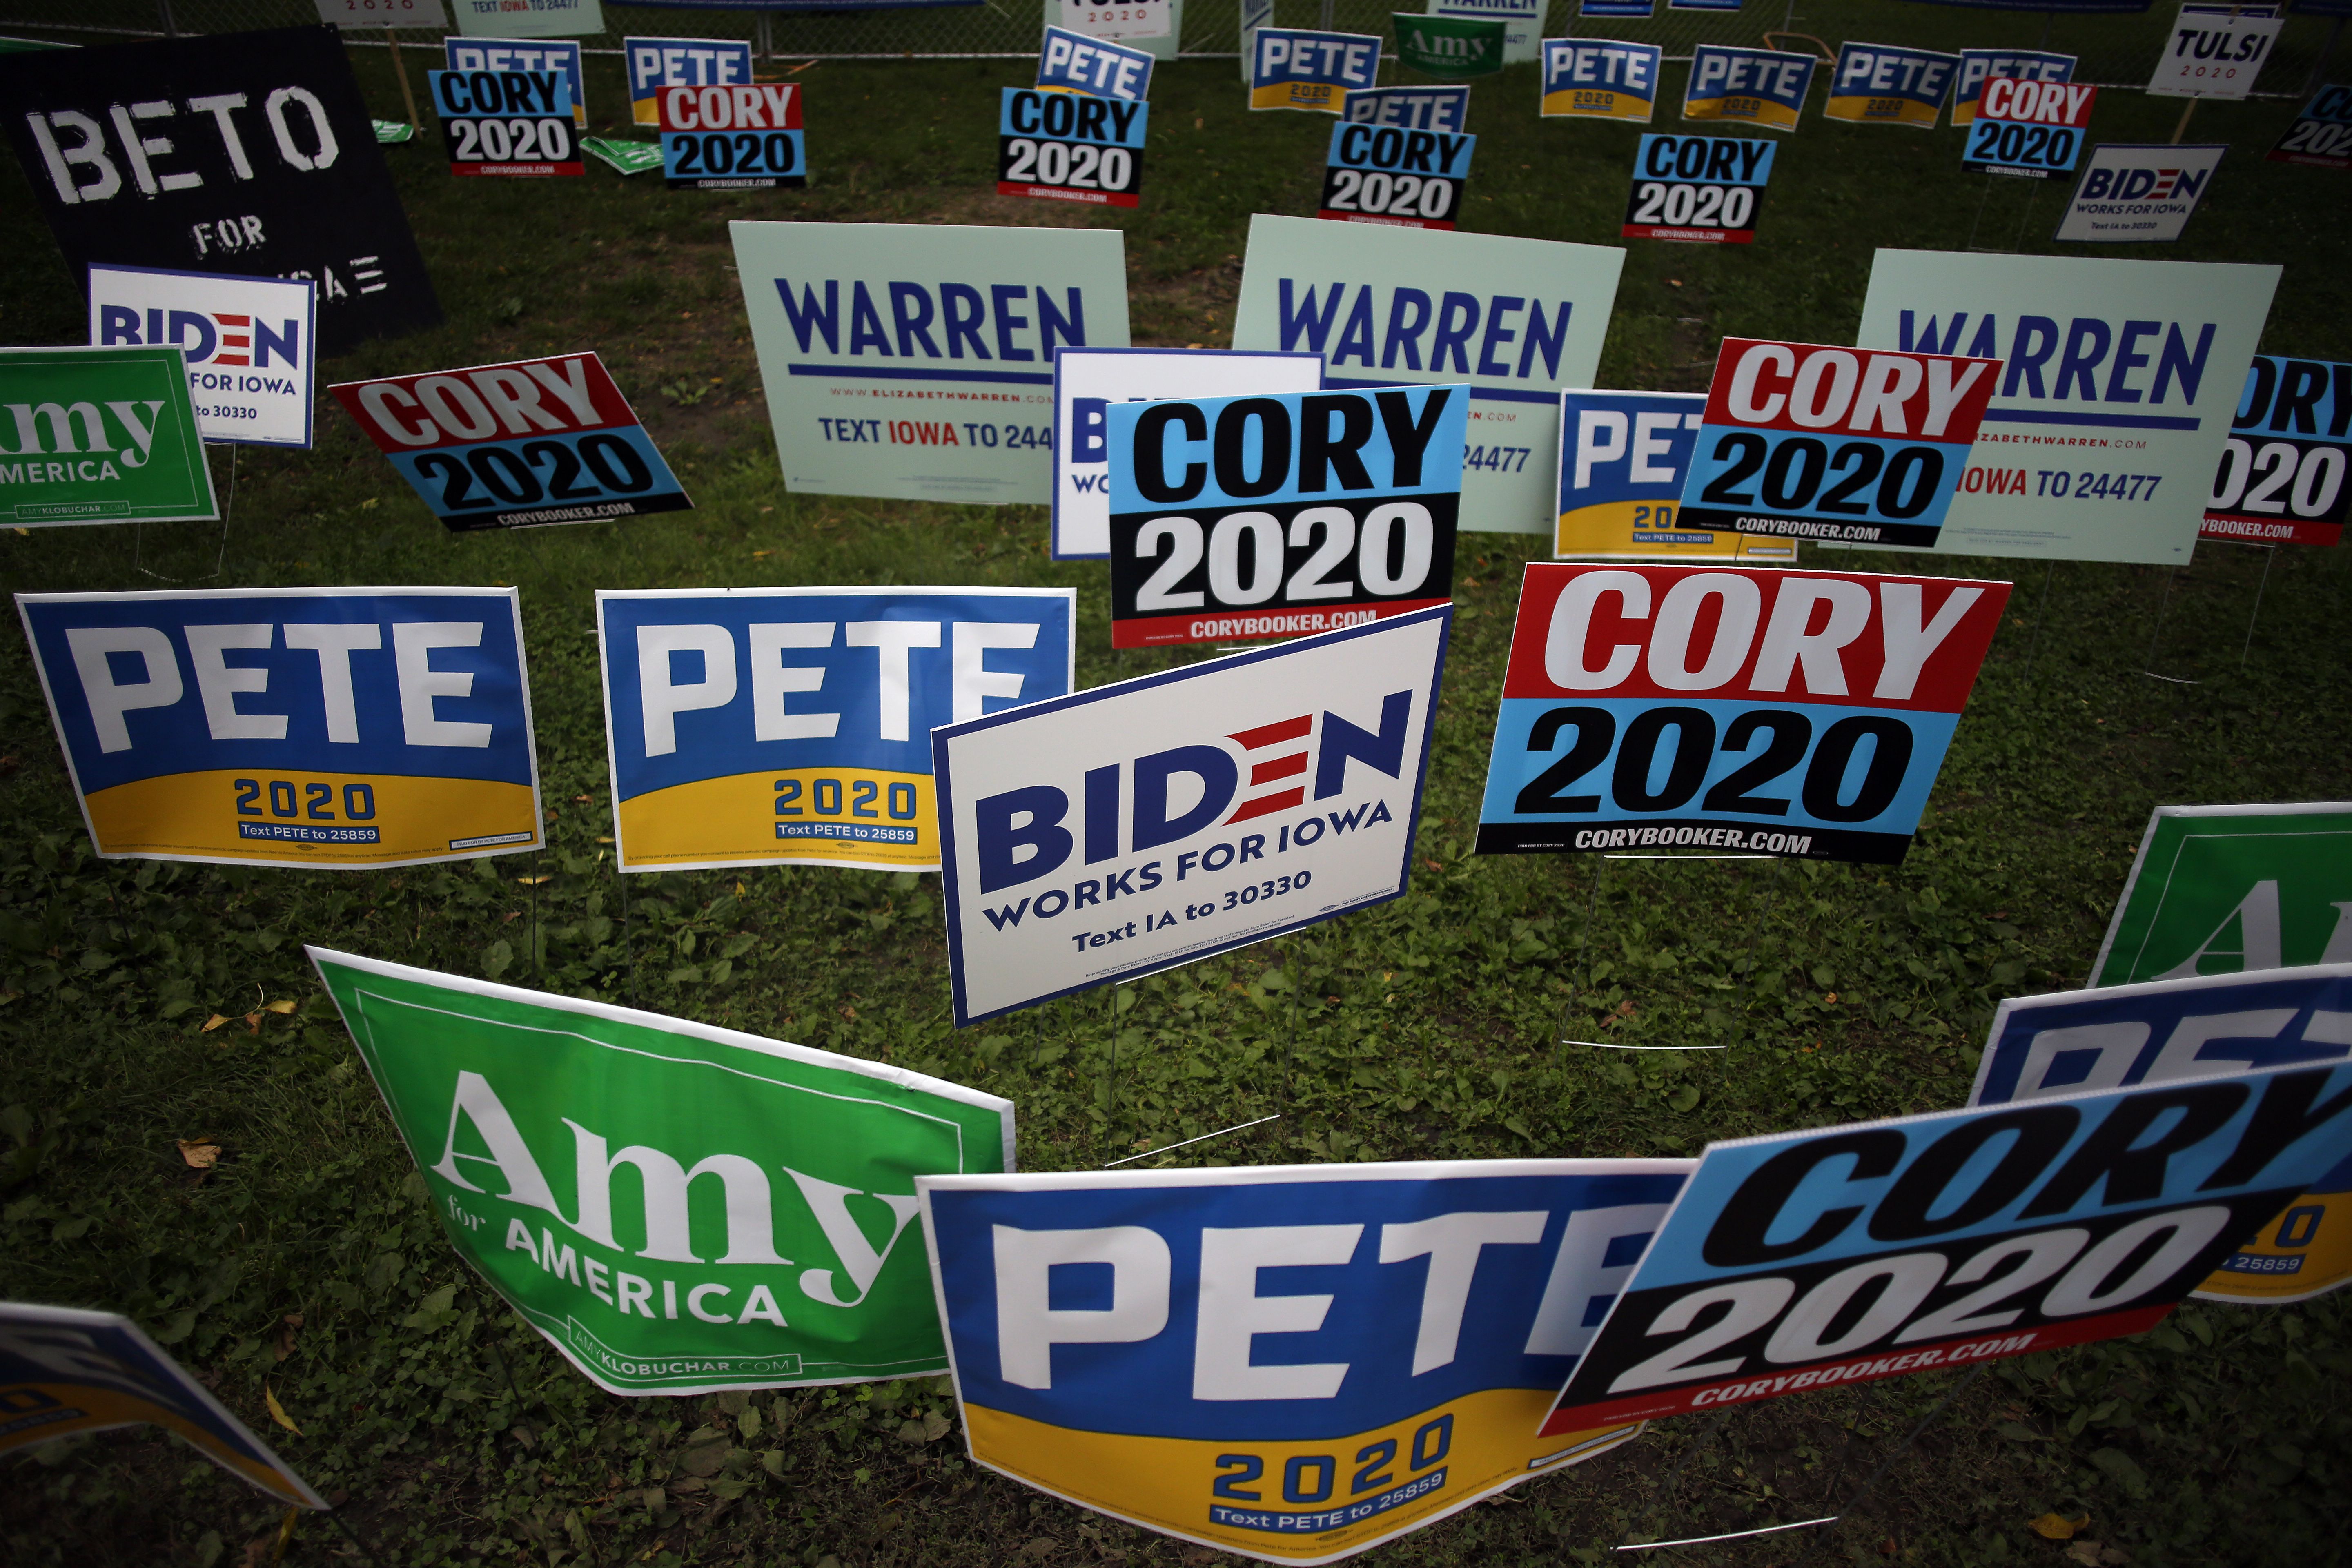 Democratic presidential campaign signs are displayed during the Democratic Polk County Steak Fry on September 21, 2019 in Des Moines, Iowa. 